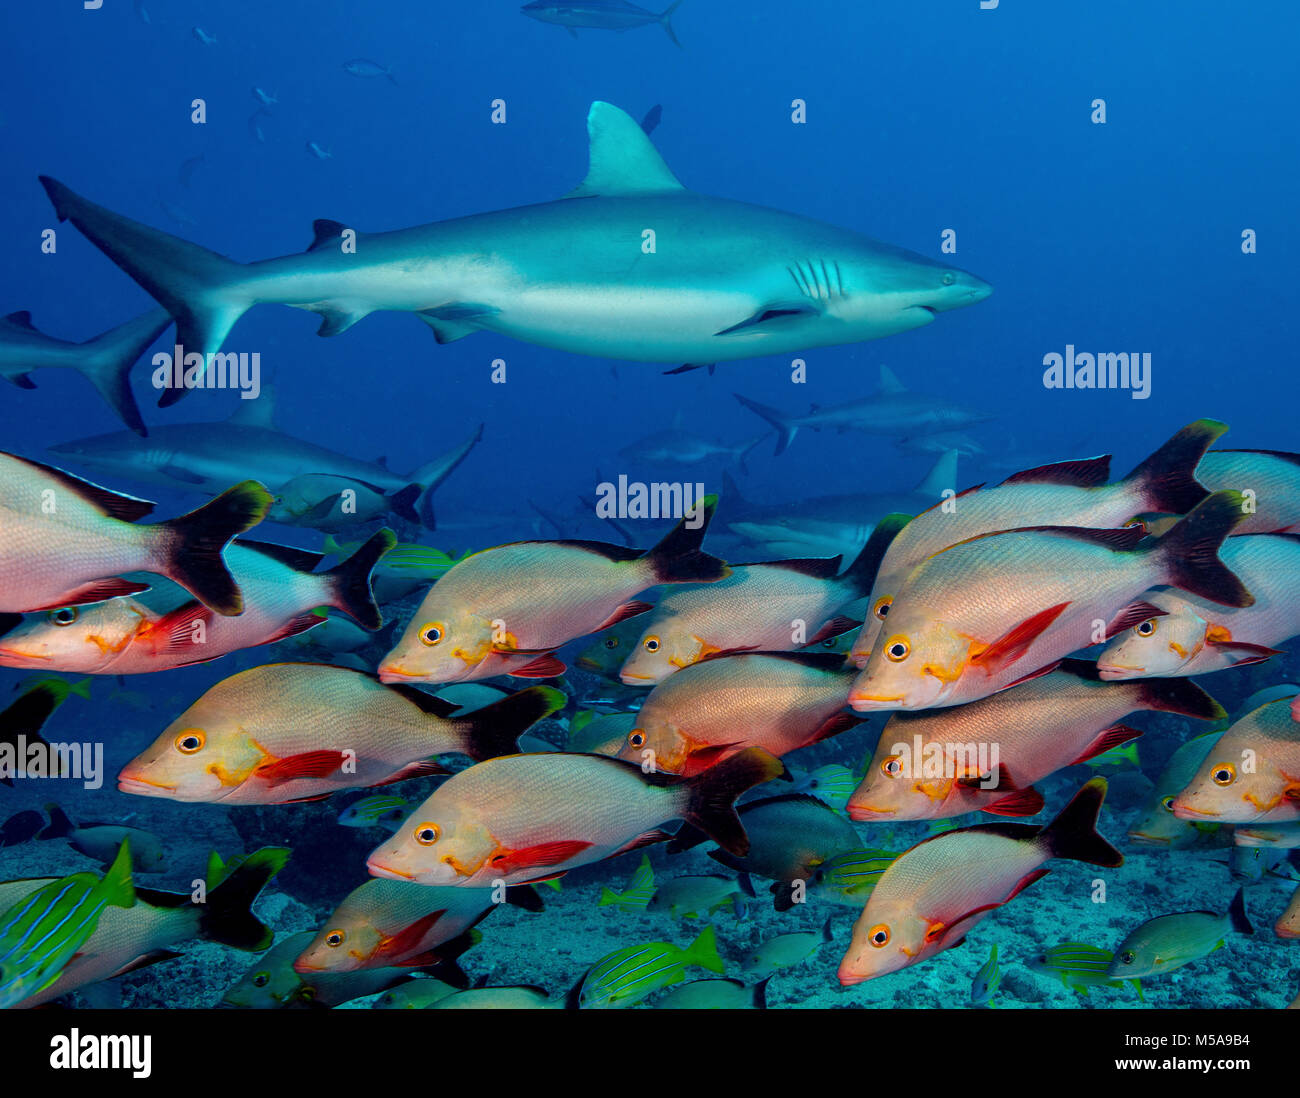 Marine life, fish in the waters of the South Pacific. A grey reef shark among a humpback red snapper shoal. Stock Photo